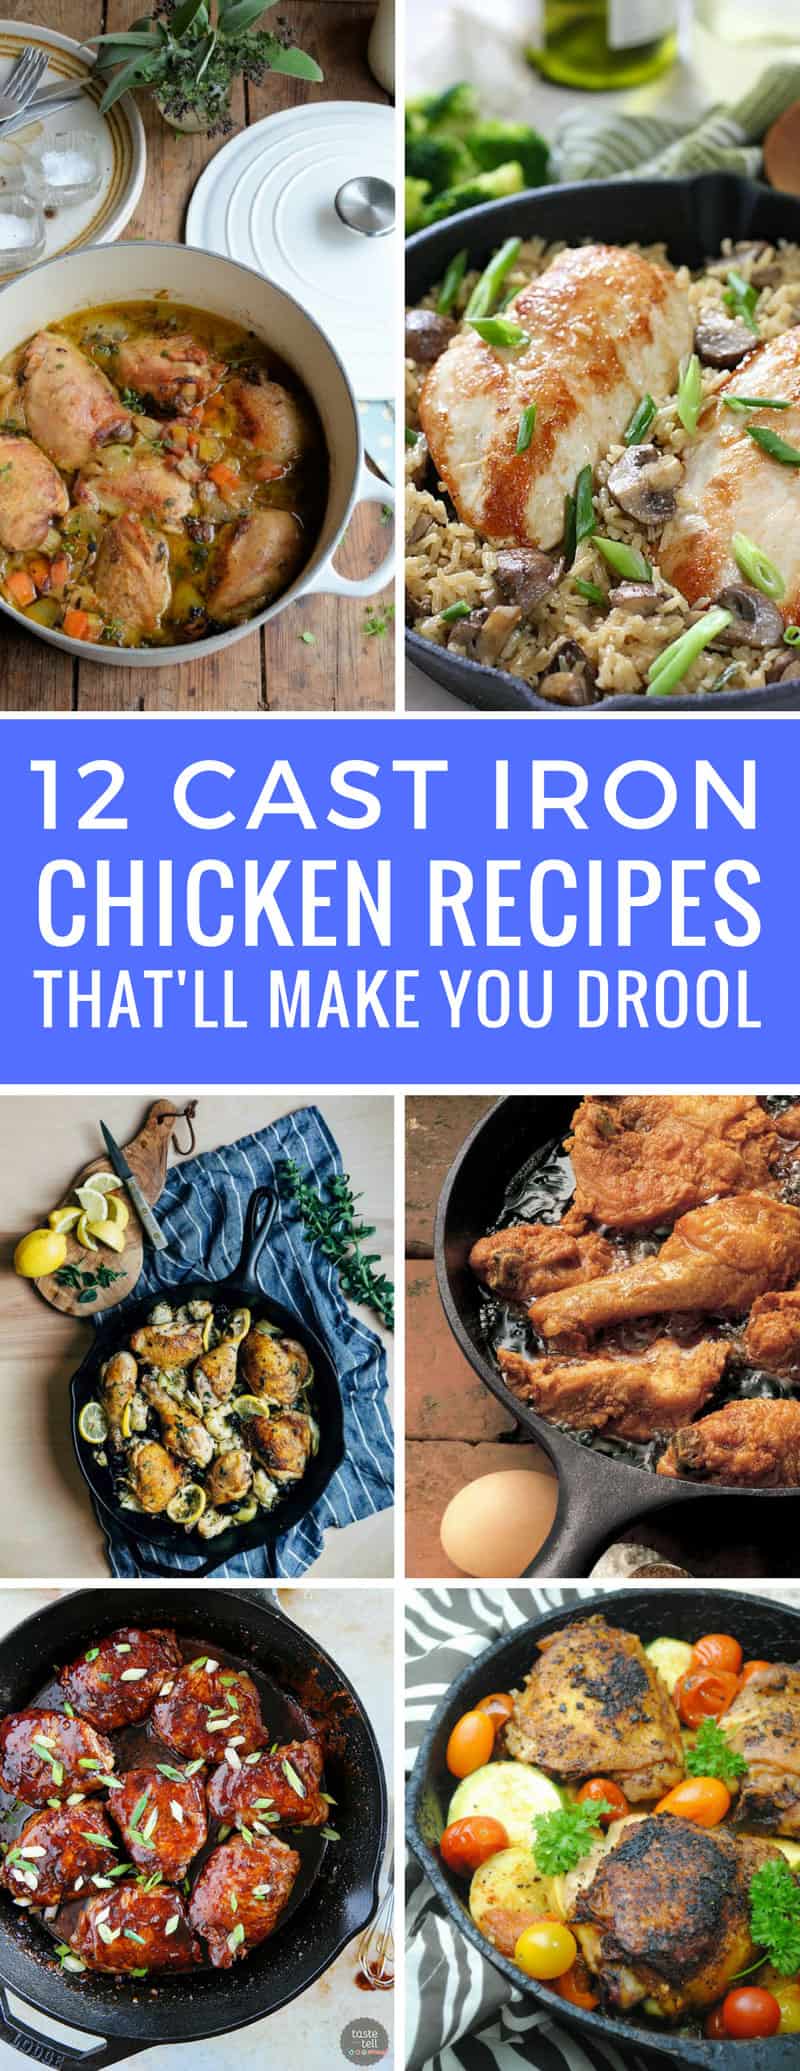 Yum - can't wait to get the skillet out and try these cast iron chicken recipes! Thanks for sharing!